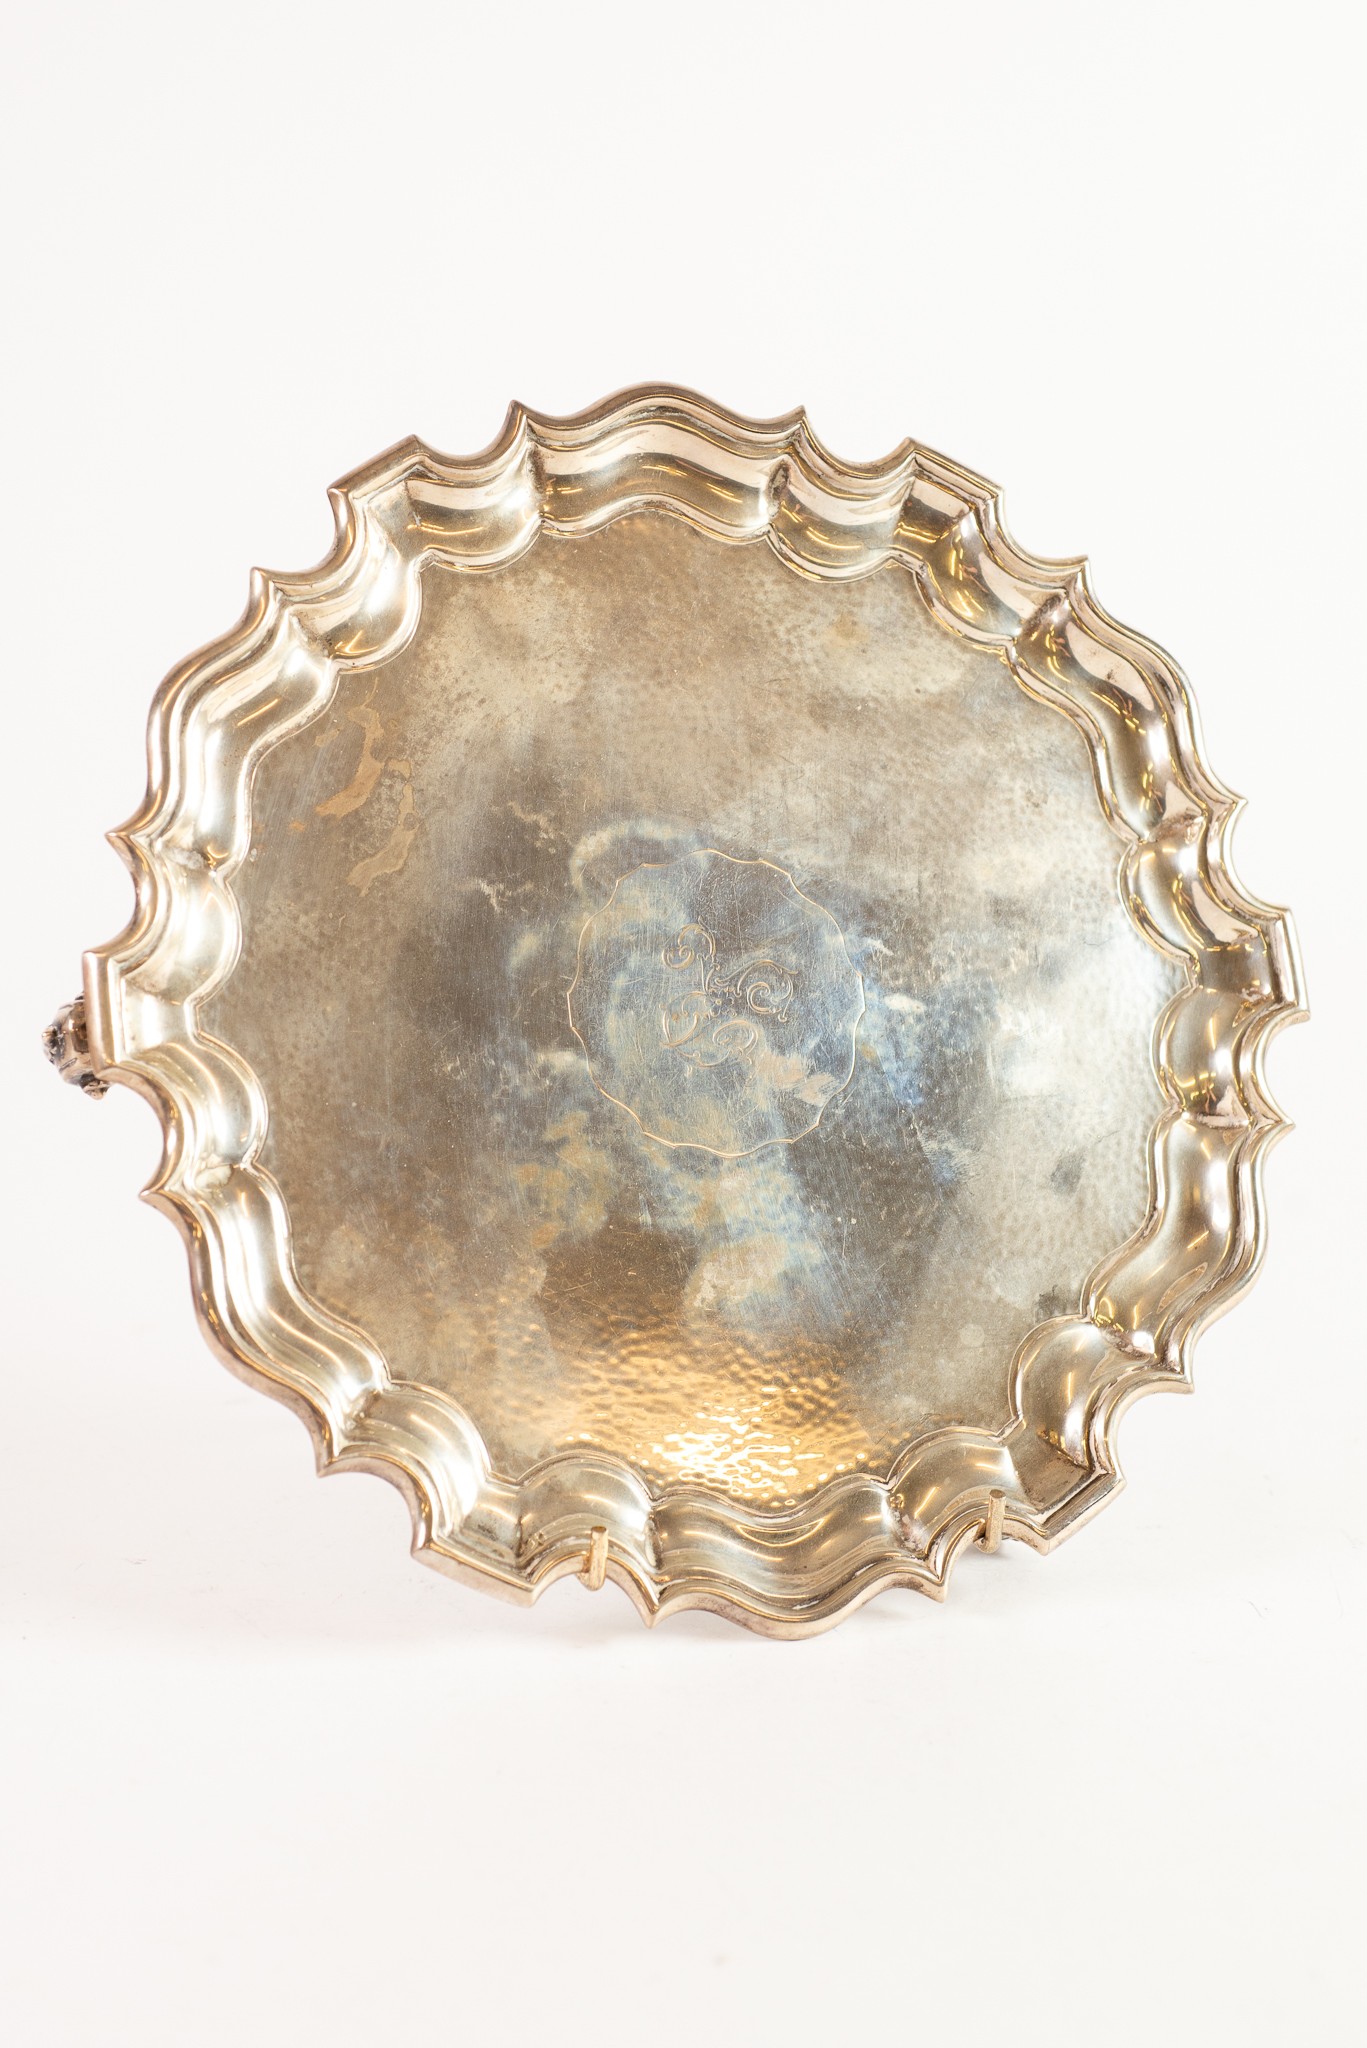 EDWARDIAN SILVER WAITER, the PLANISHED TOP centred with engraved cursive R, with PIE-CRUST BORDER